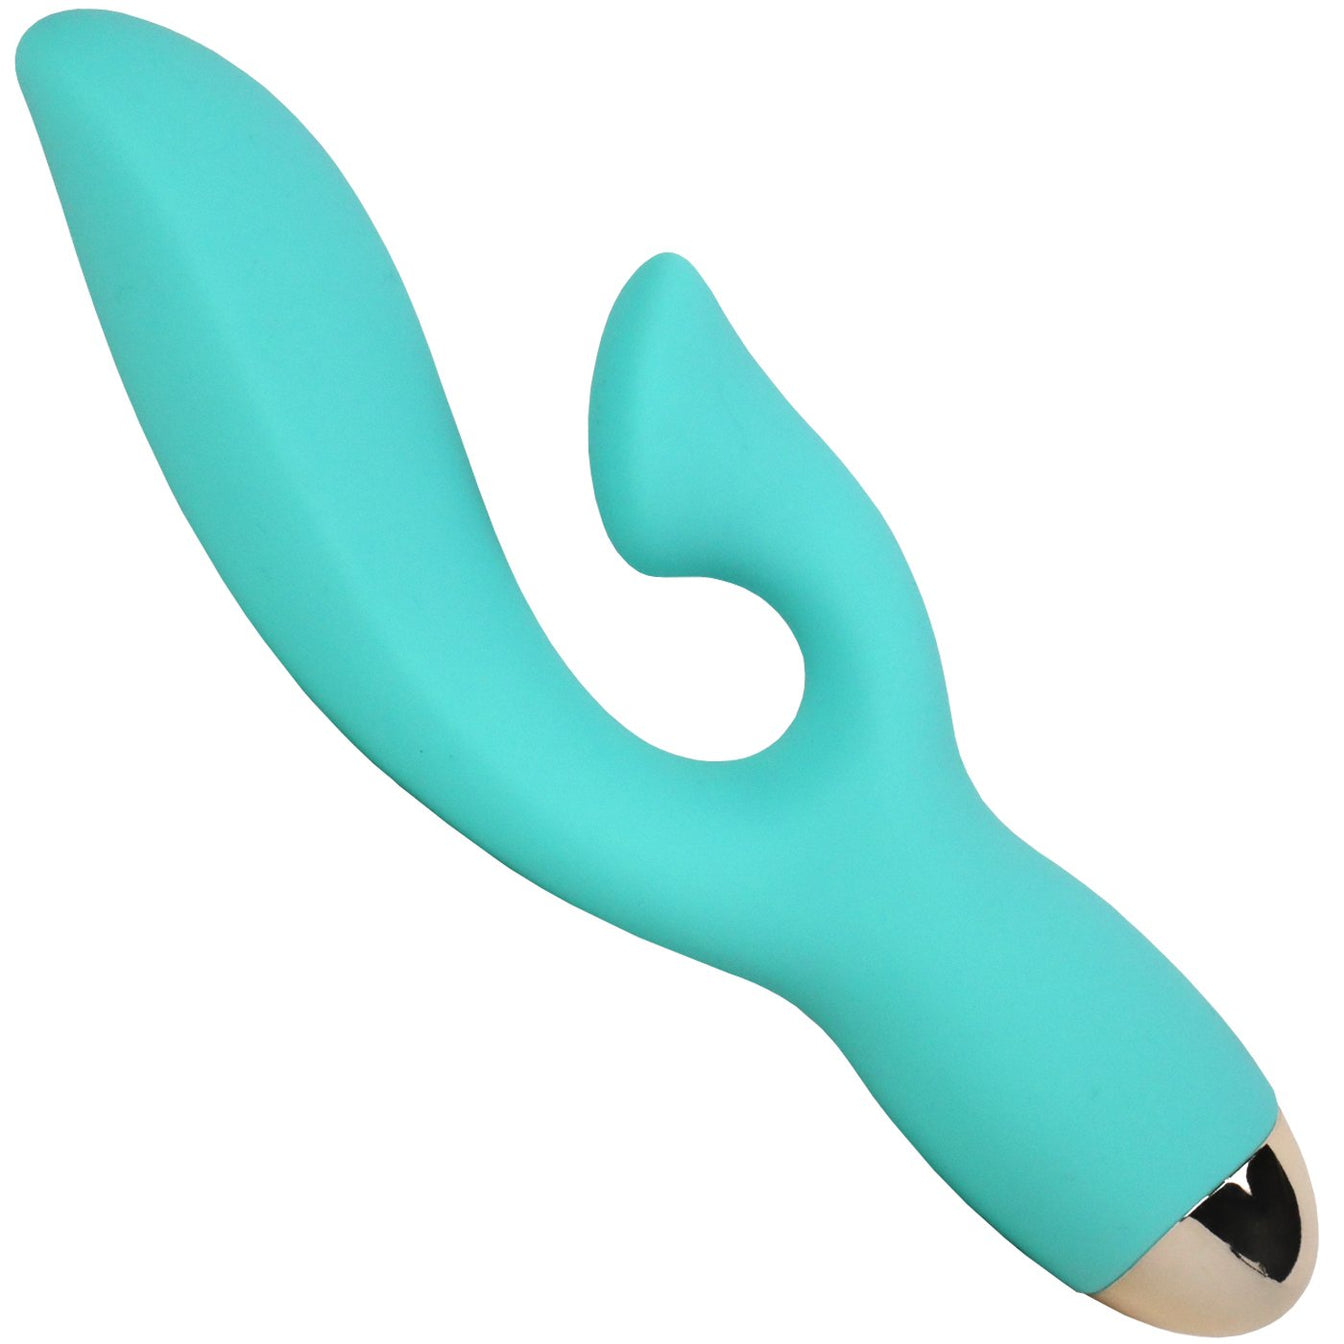 Image of teal colored dual action vibrator